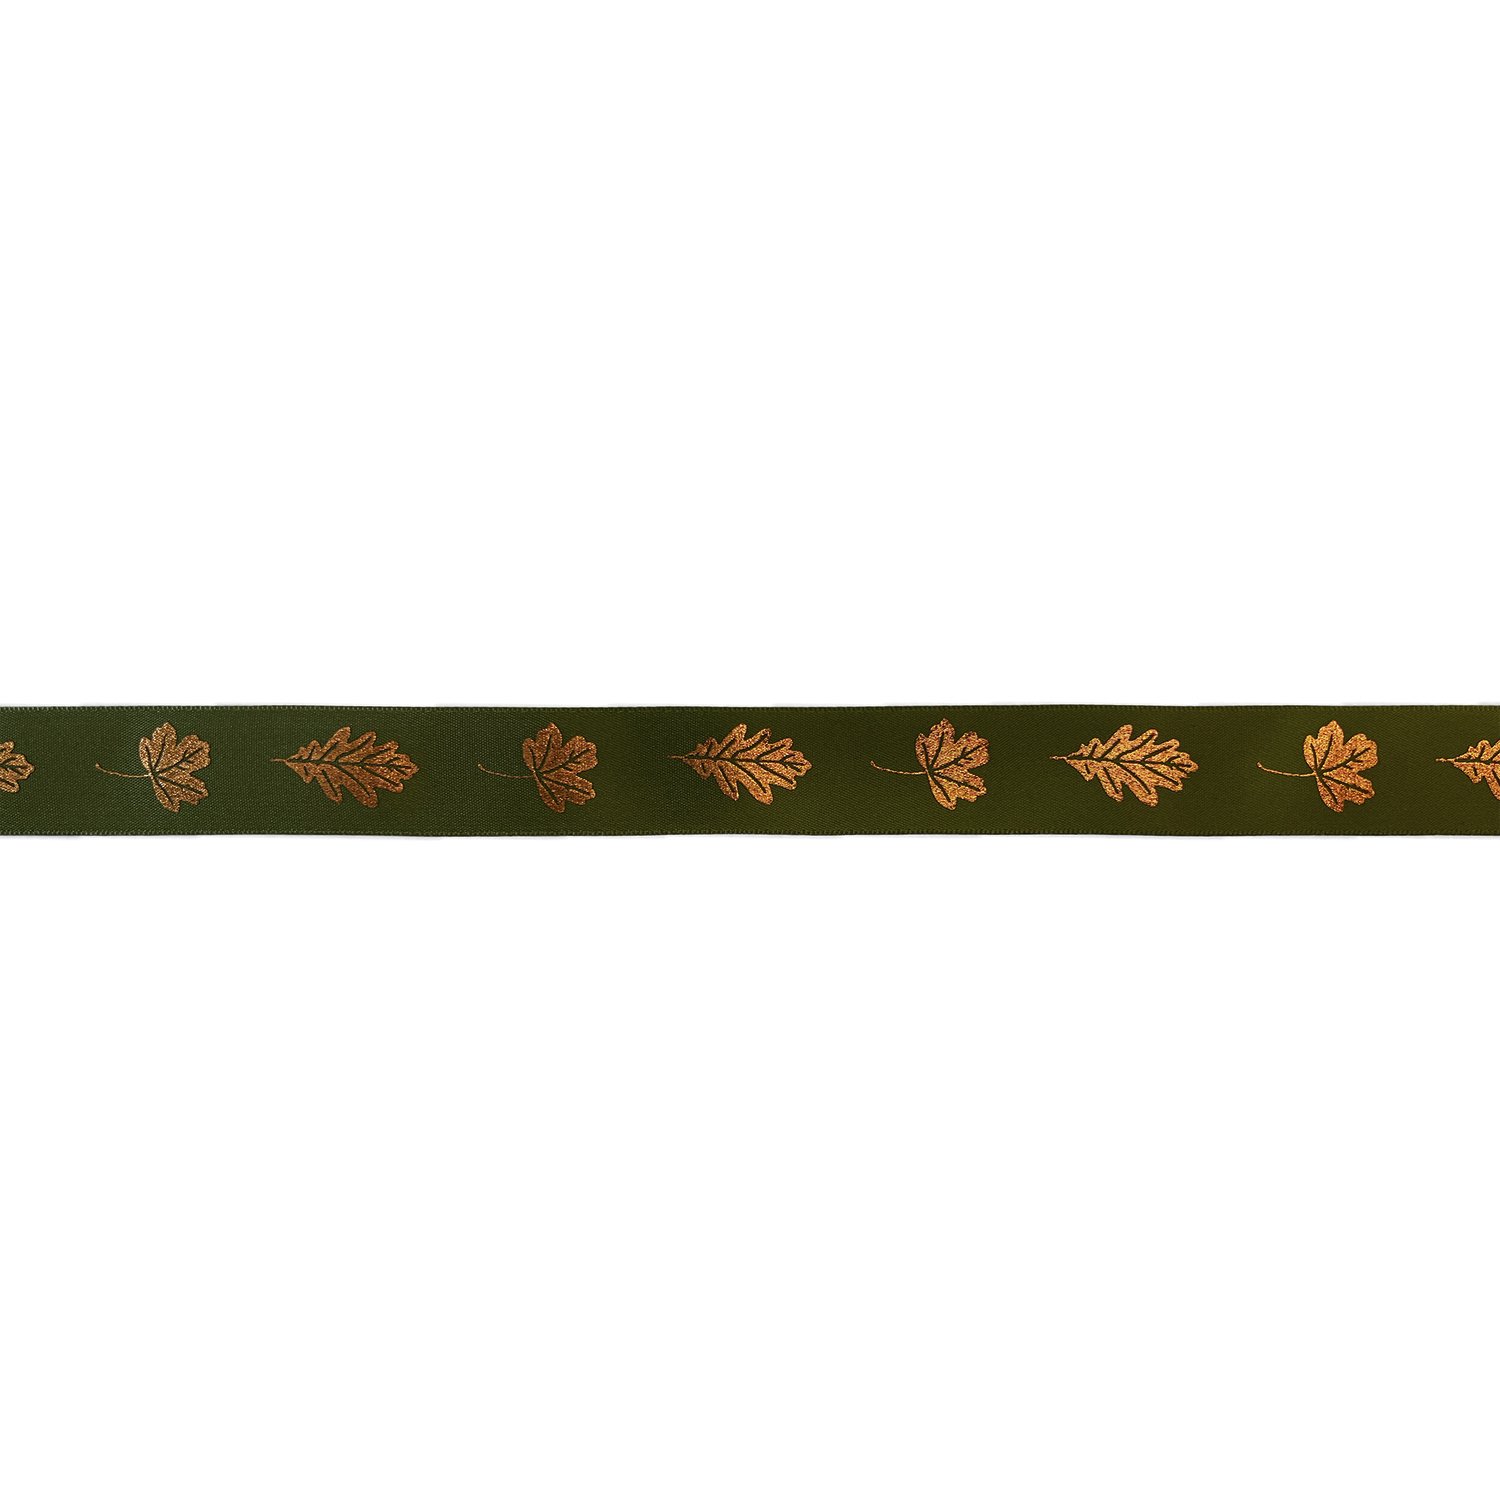 Forest green single faced satin ribbon with bronze autumn leaves - 23mmx25m